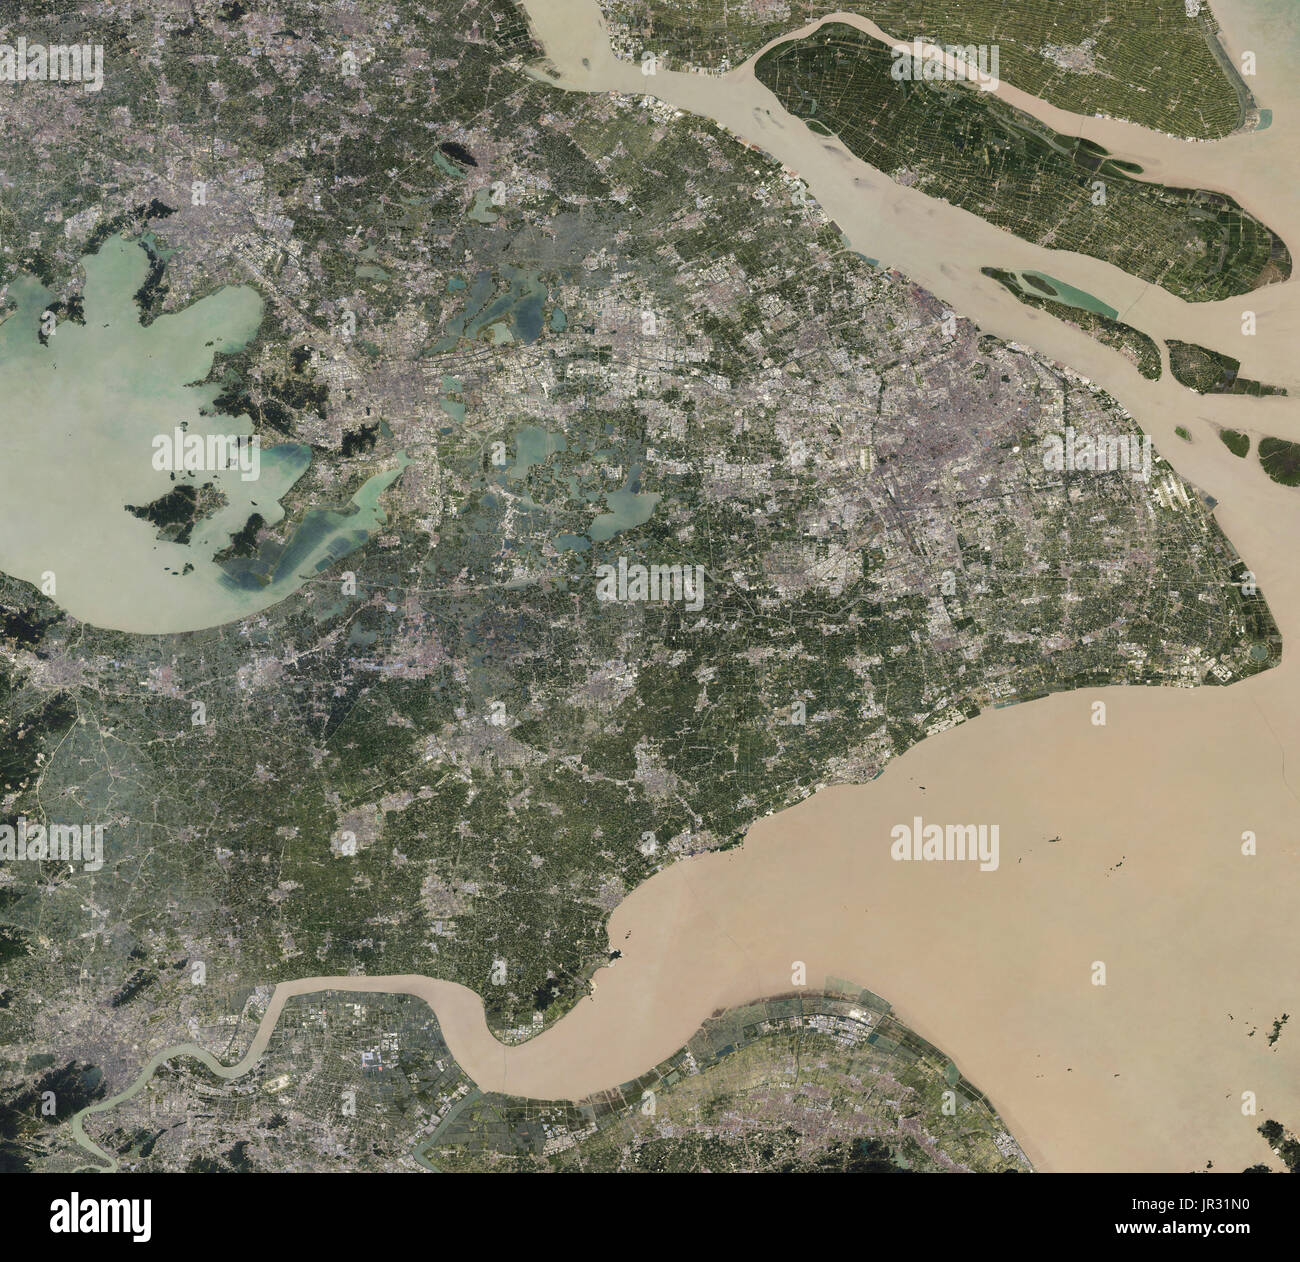 Shanghai, China, captured by the Operational Land Imager (OLI) on Landsat 8 between 2013 and 2017. Compare with JG5370, showing Shanghai from the late 1980s. Stock Photo